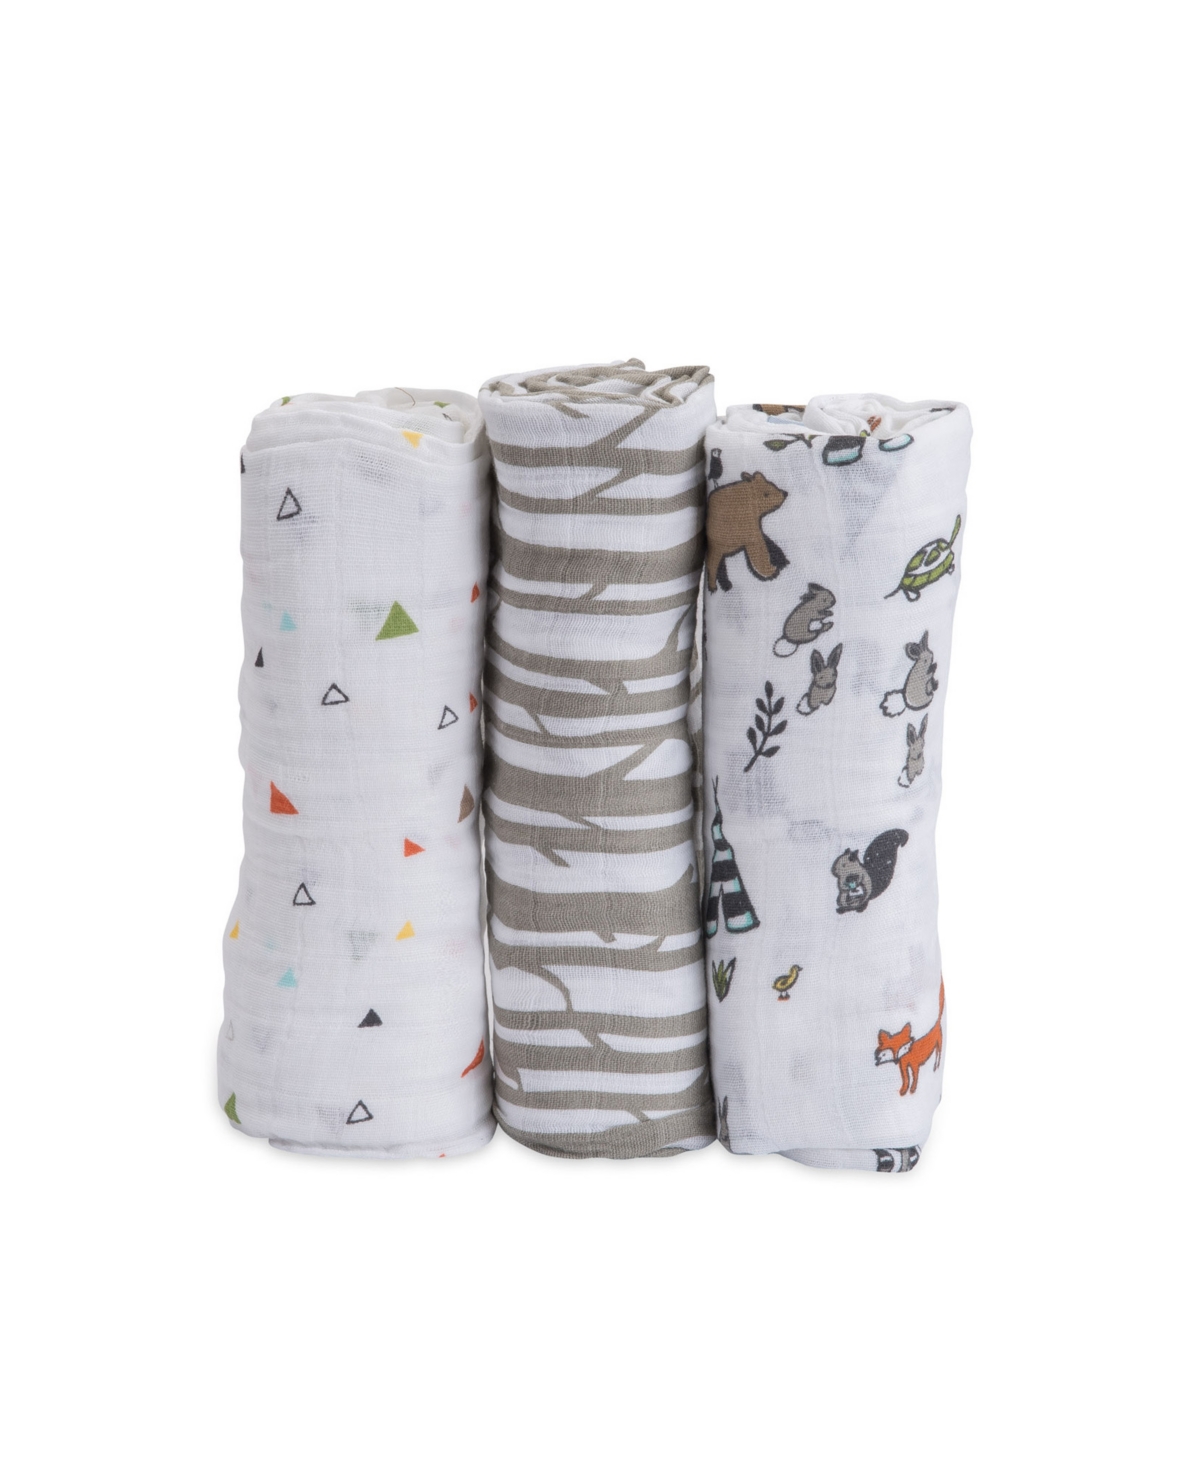 UPC 812967020089 product image for Little Unicorn Forest Friends Cotton Muslin 3-Pack Swaddle Blanket Set | upcitemdb.com